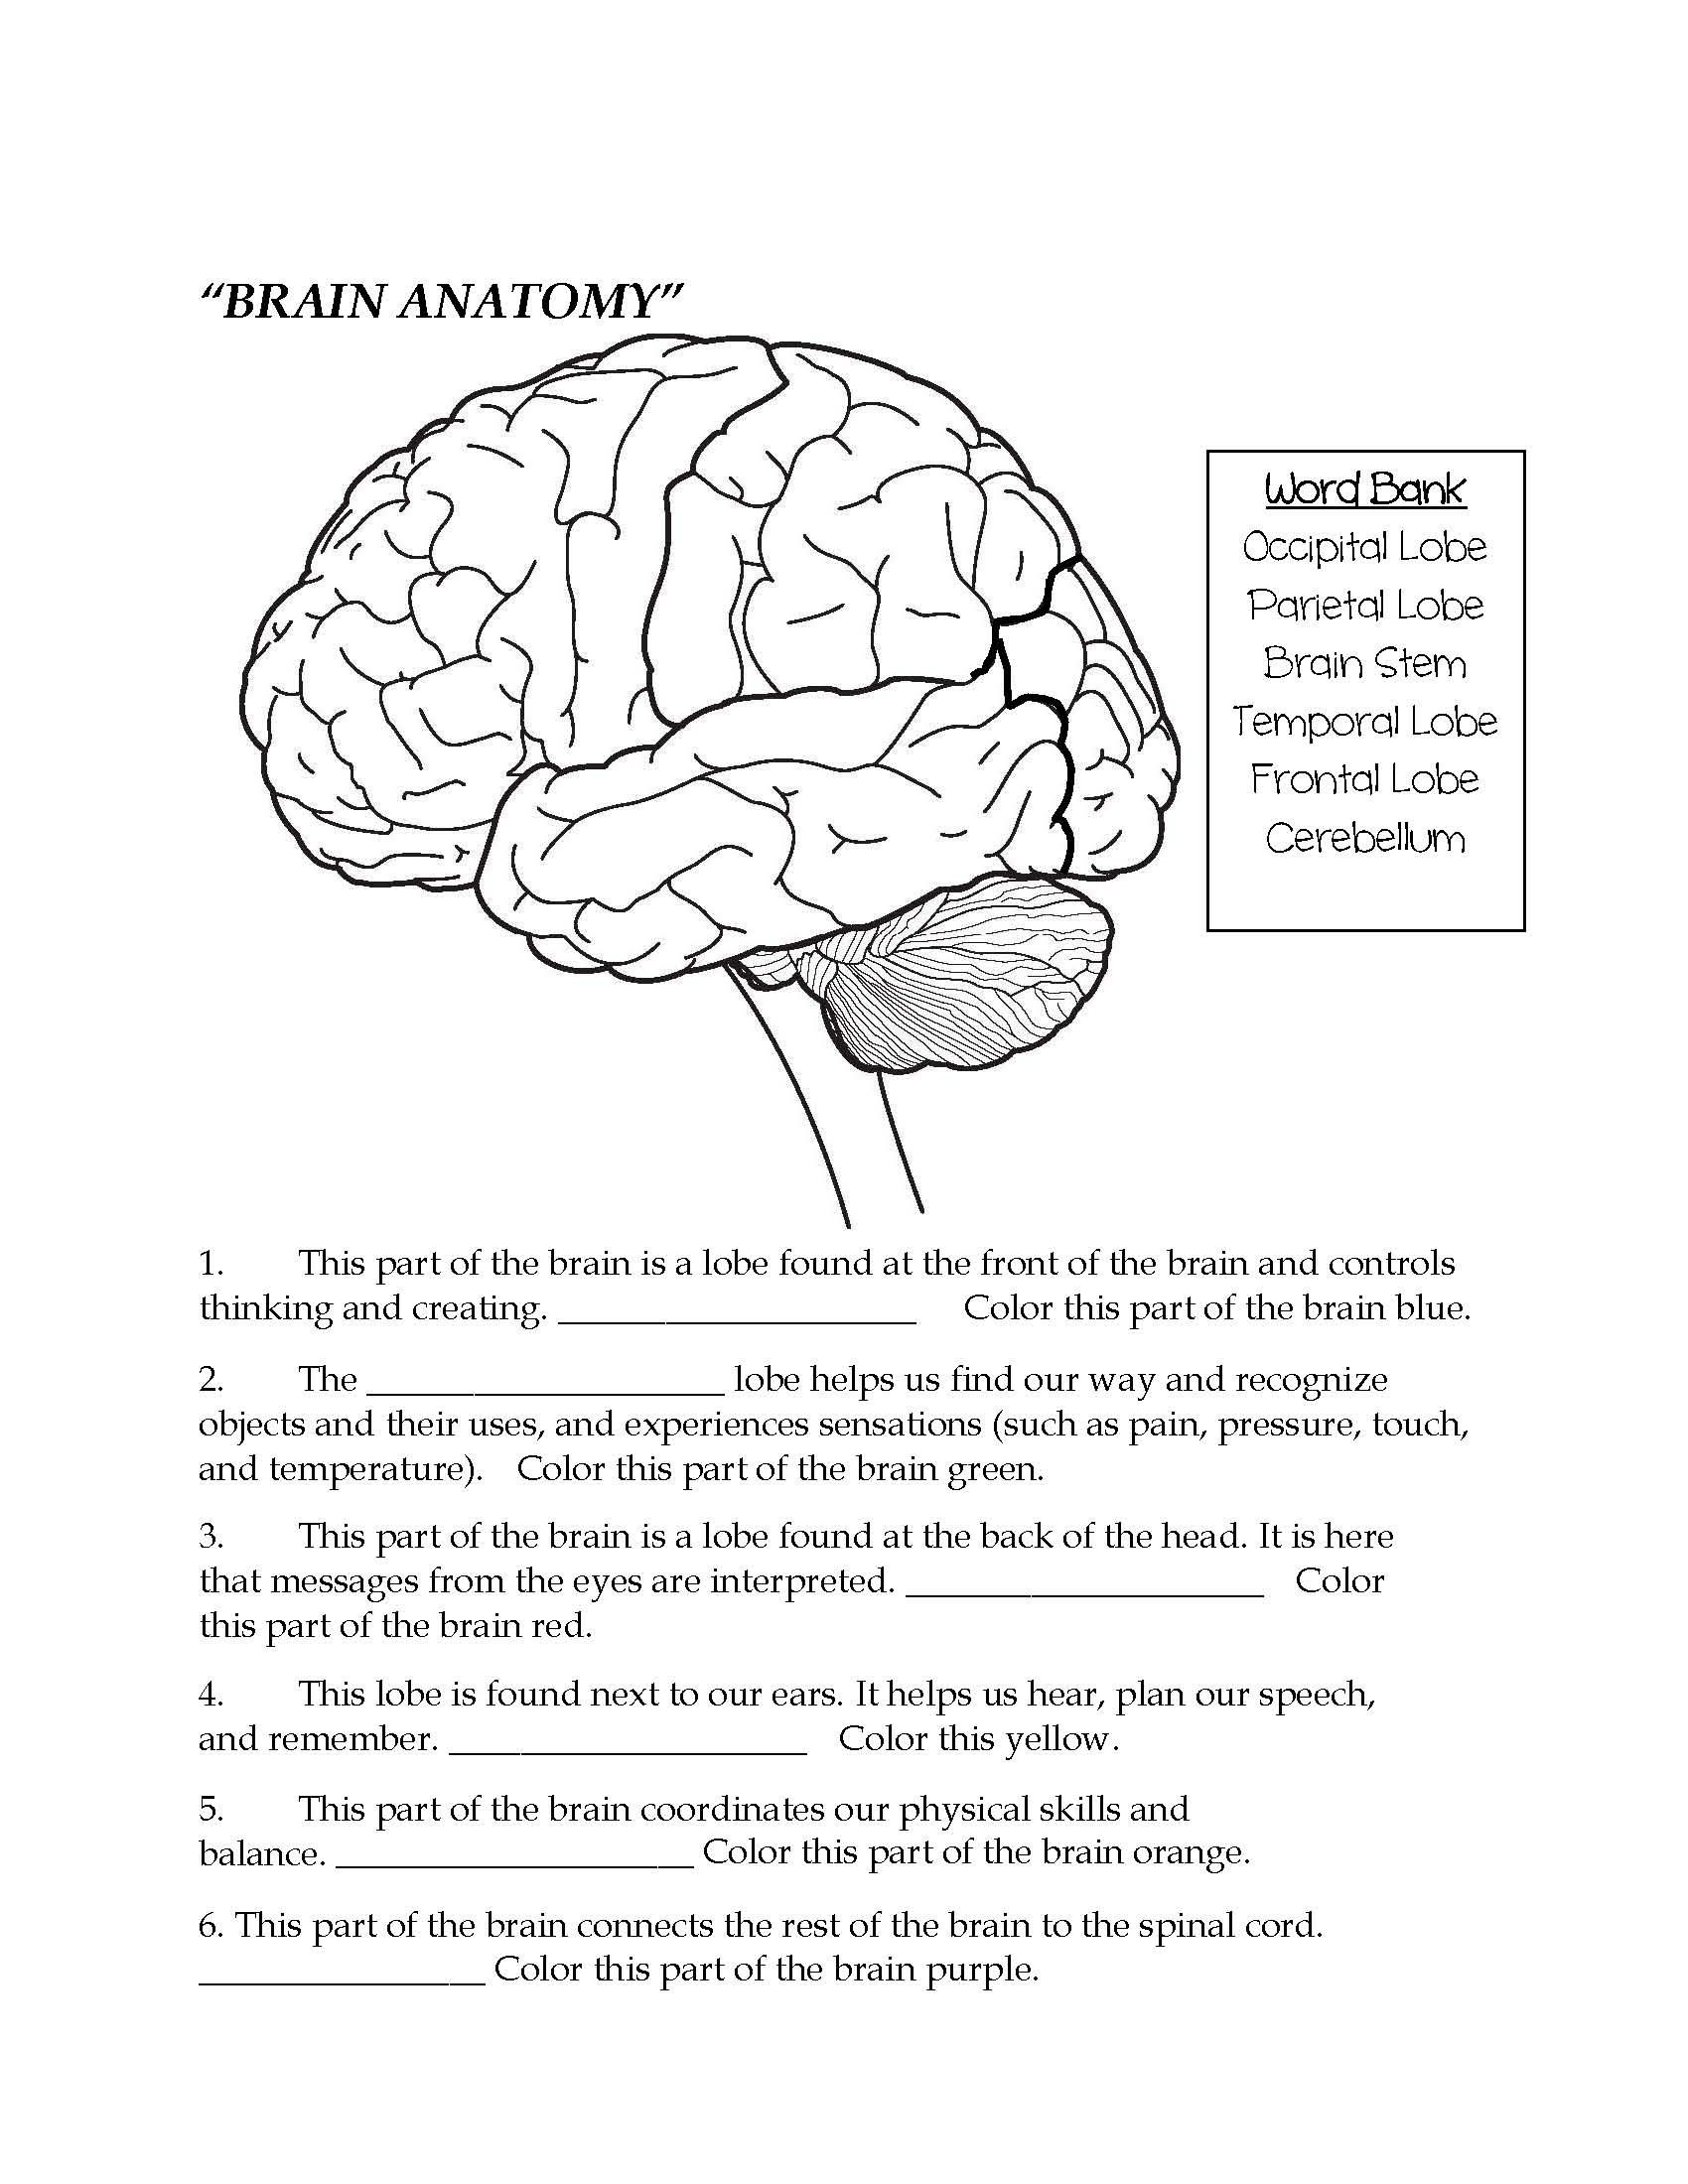 Brain Parts Fill In The Blank Color Nervous System Lesson Biology 